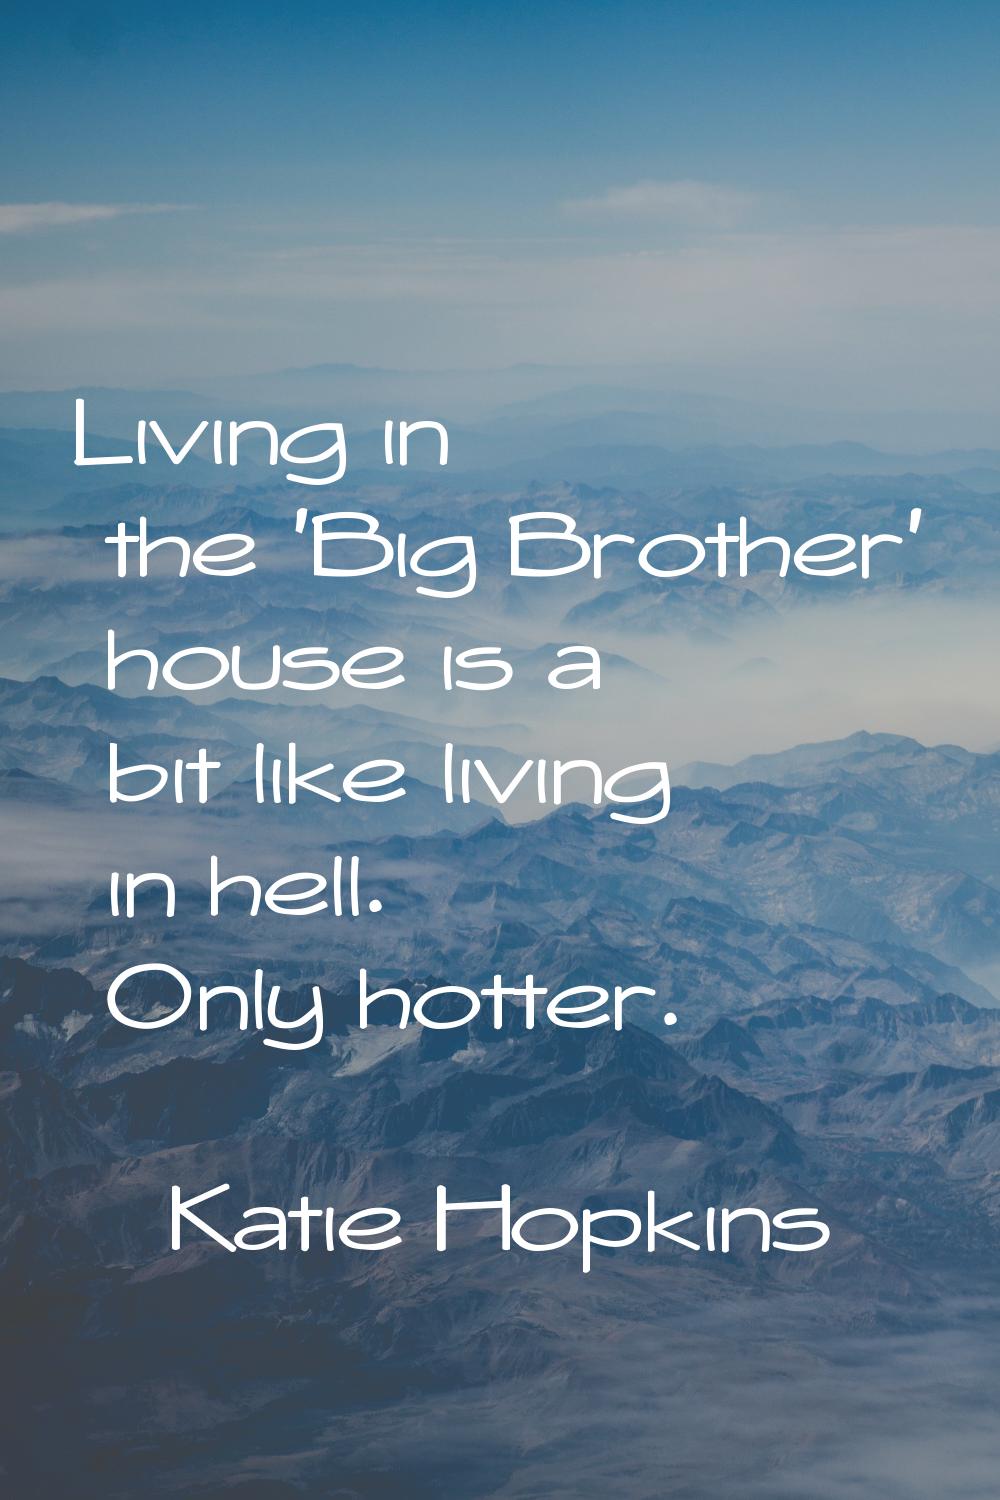 Living in the 'Big Brother' house is a bit like living in hell. Only hotter.